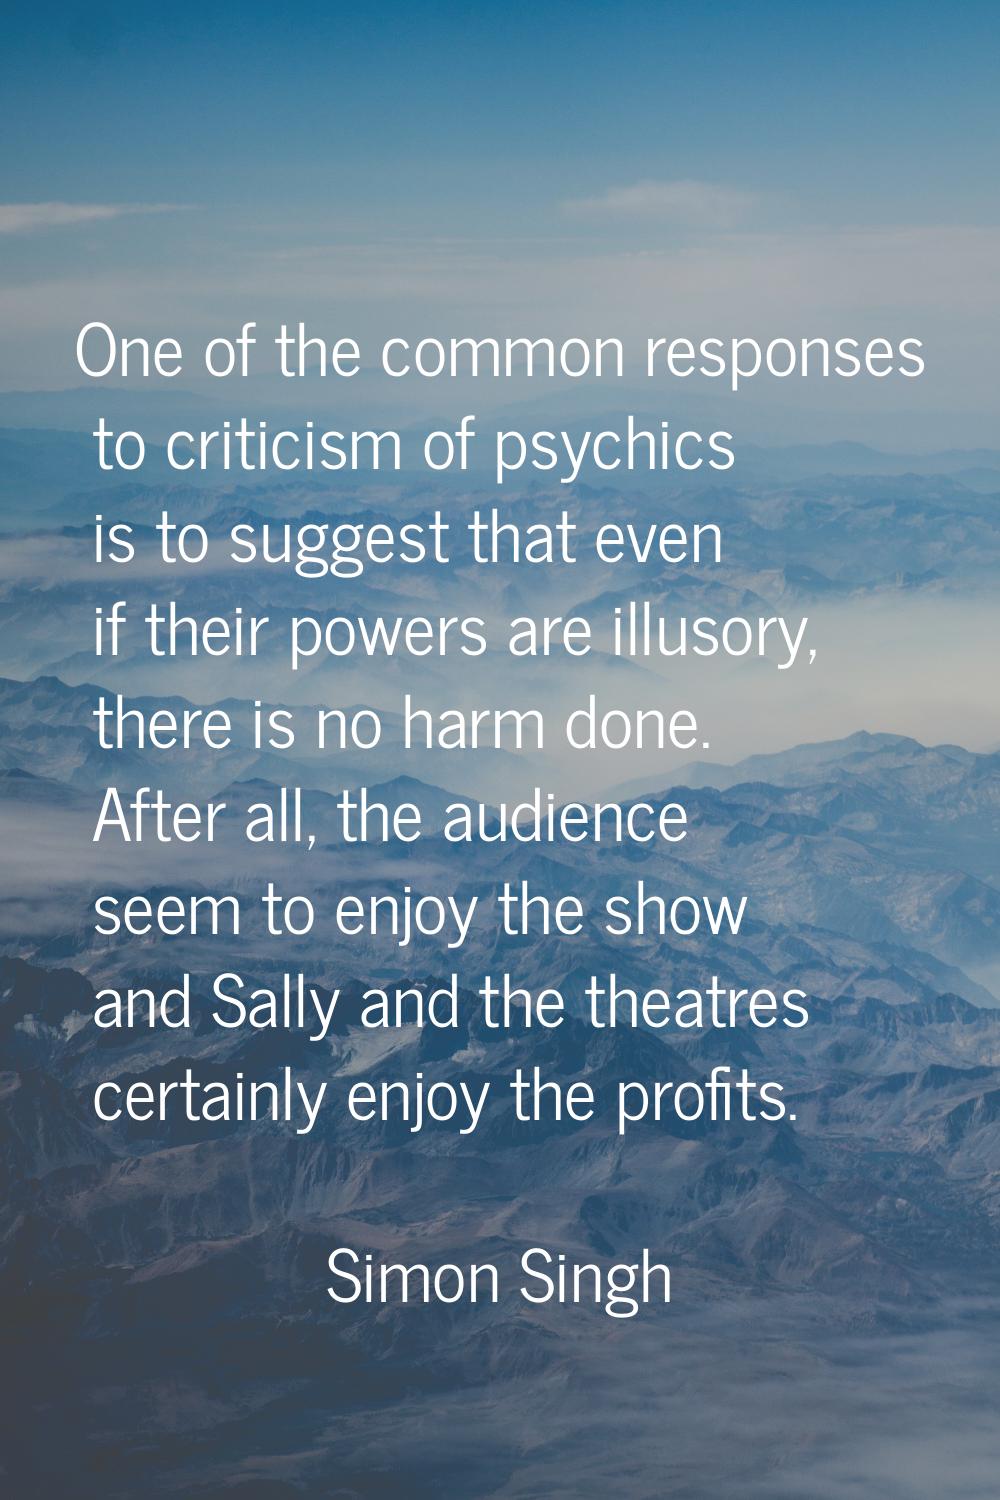 One of the common responses to criticism of psychics is to suggest that even if their powers are il